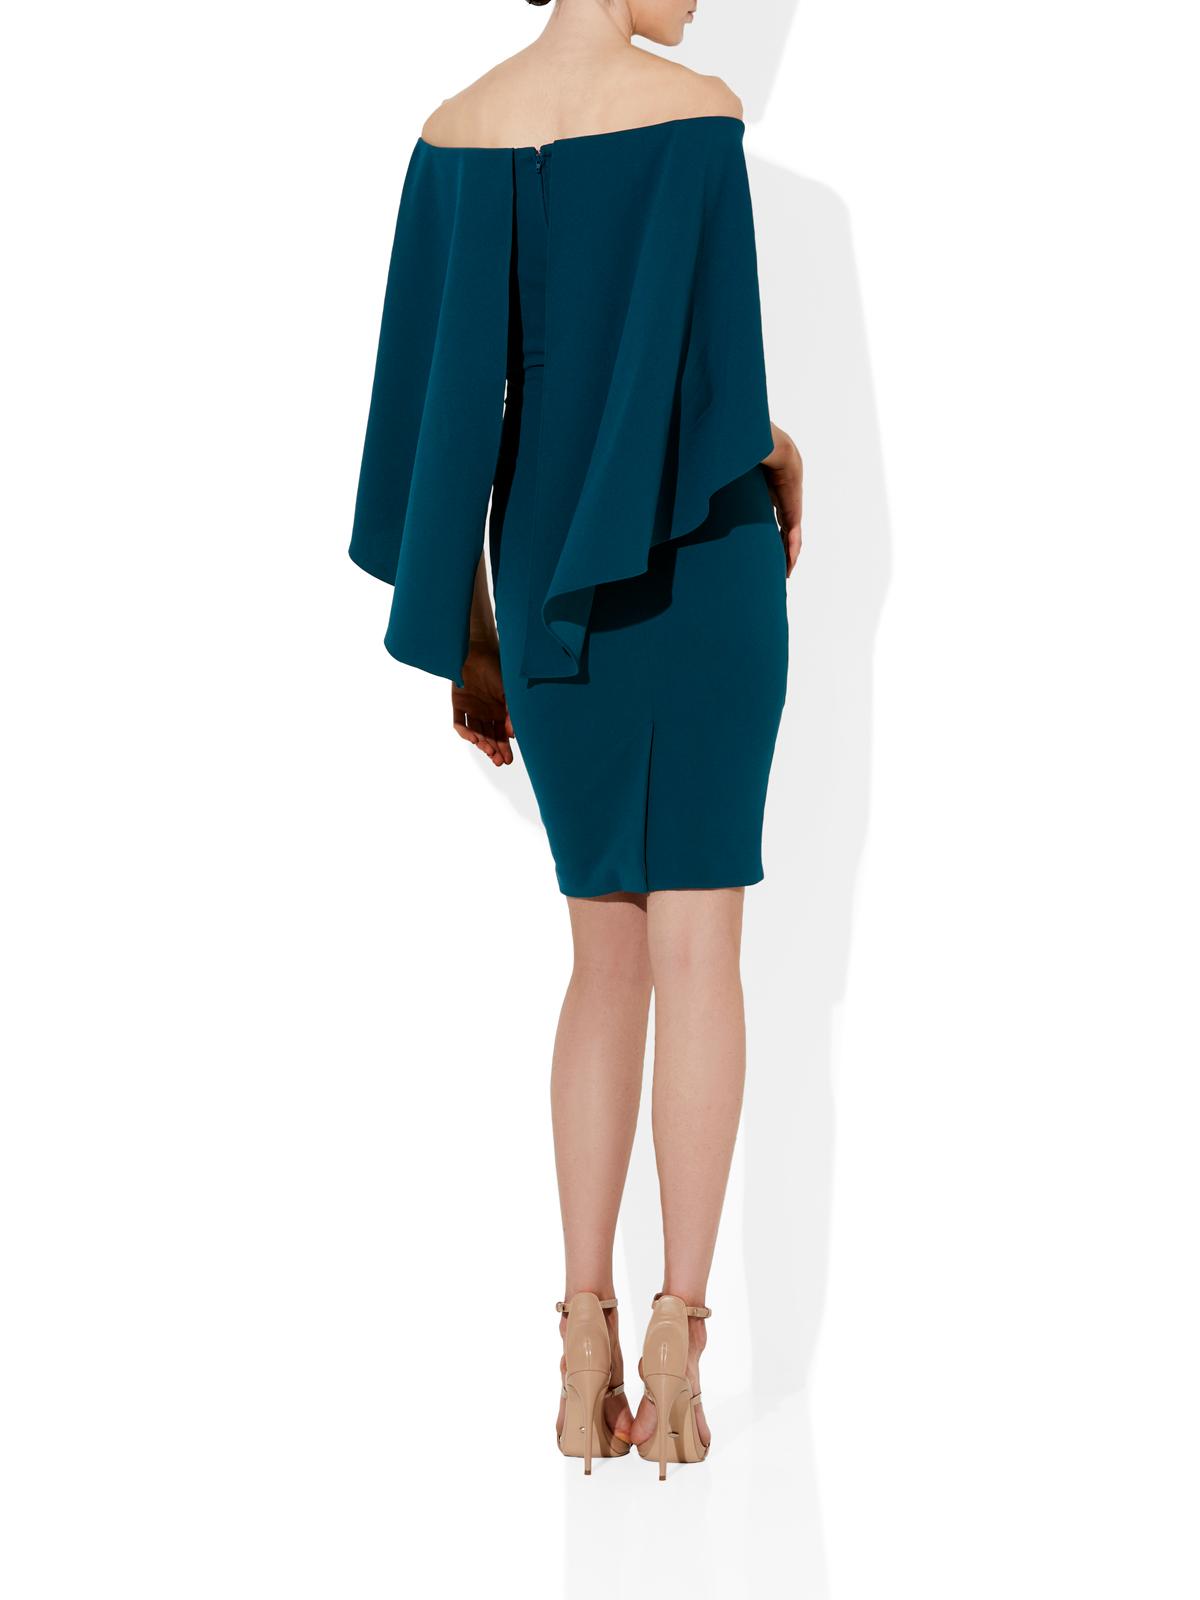 Aerin Emerald Crepe Dress by Montique